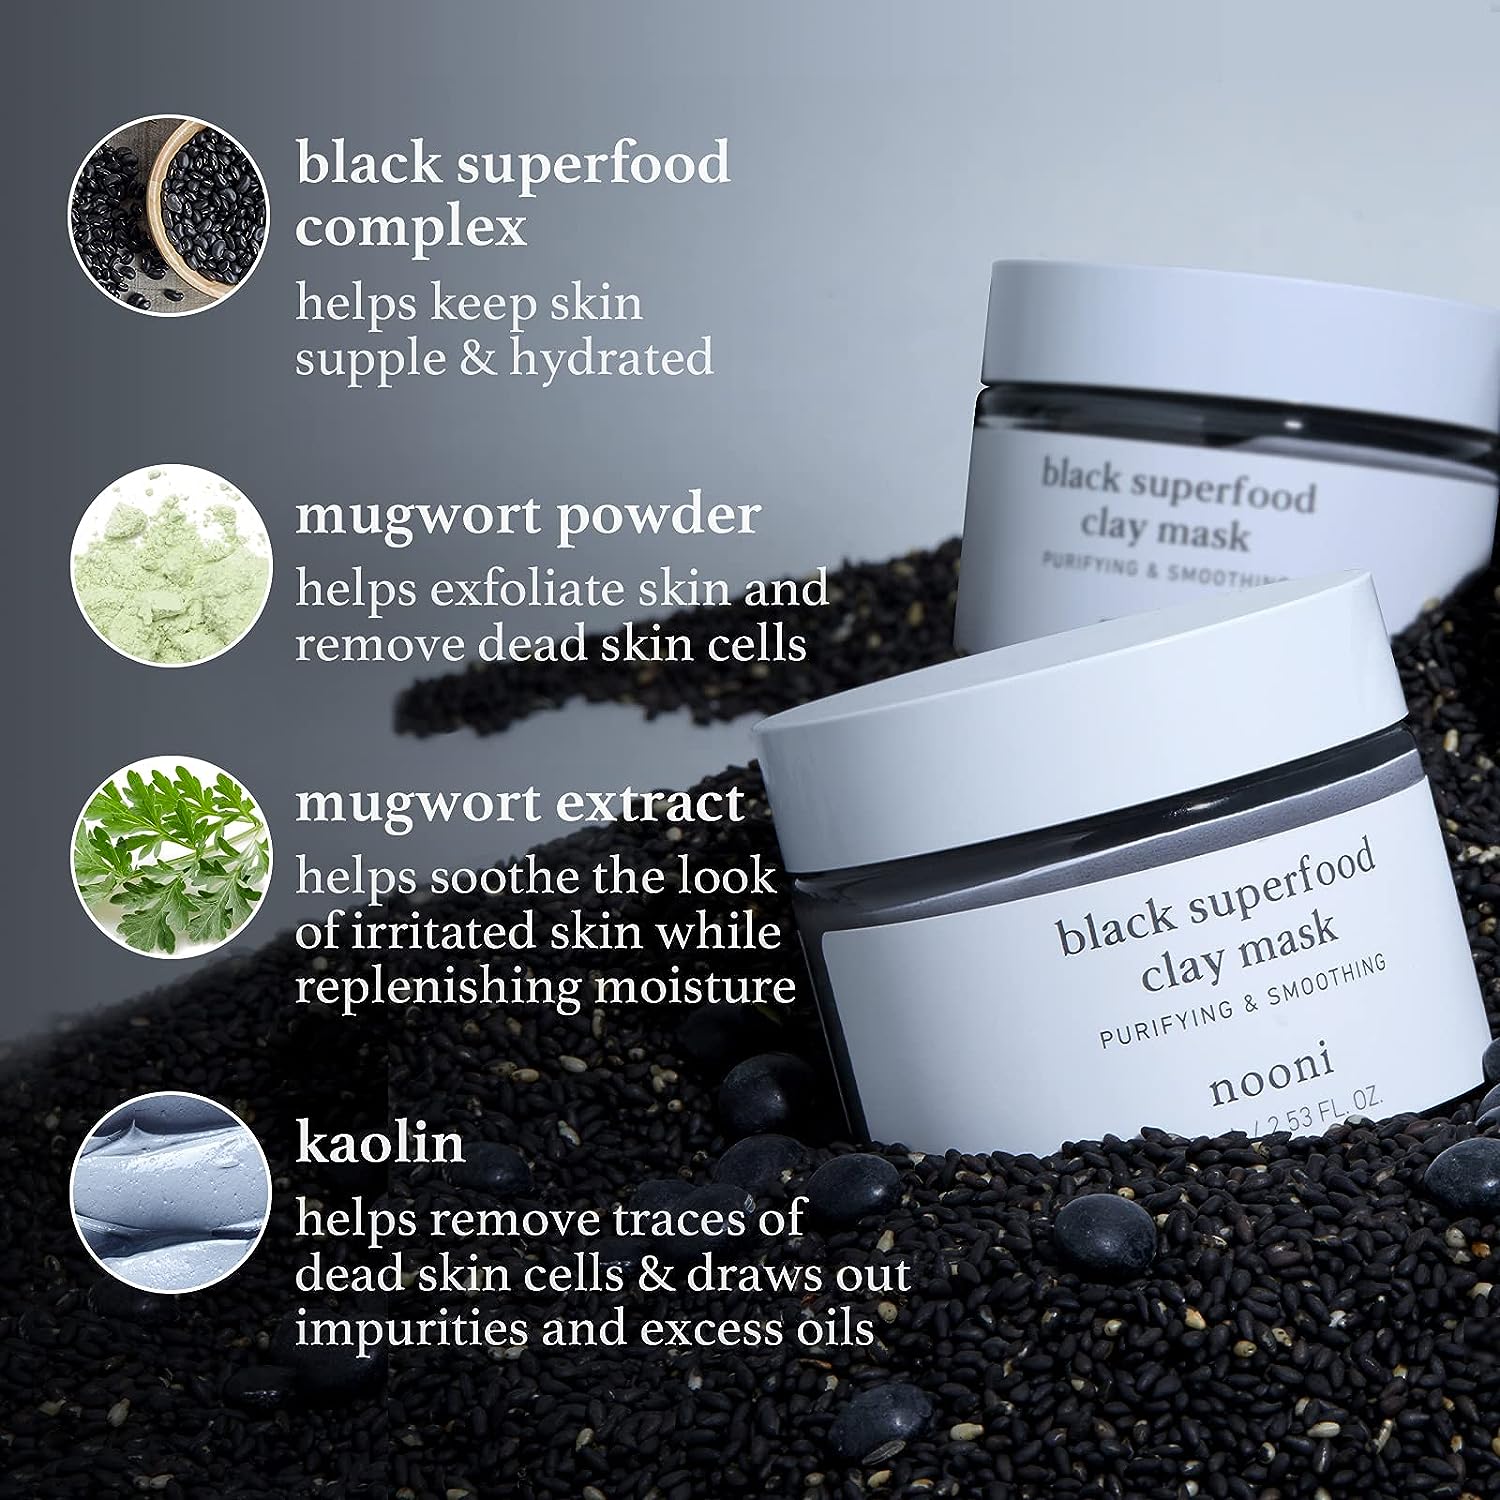 black superfood clay mask